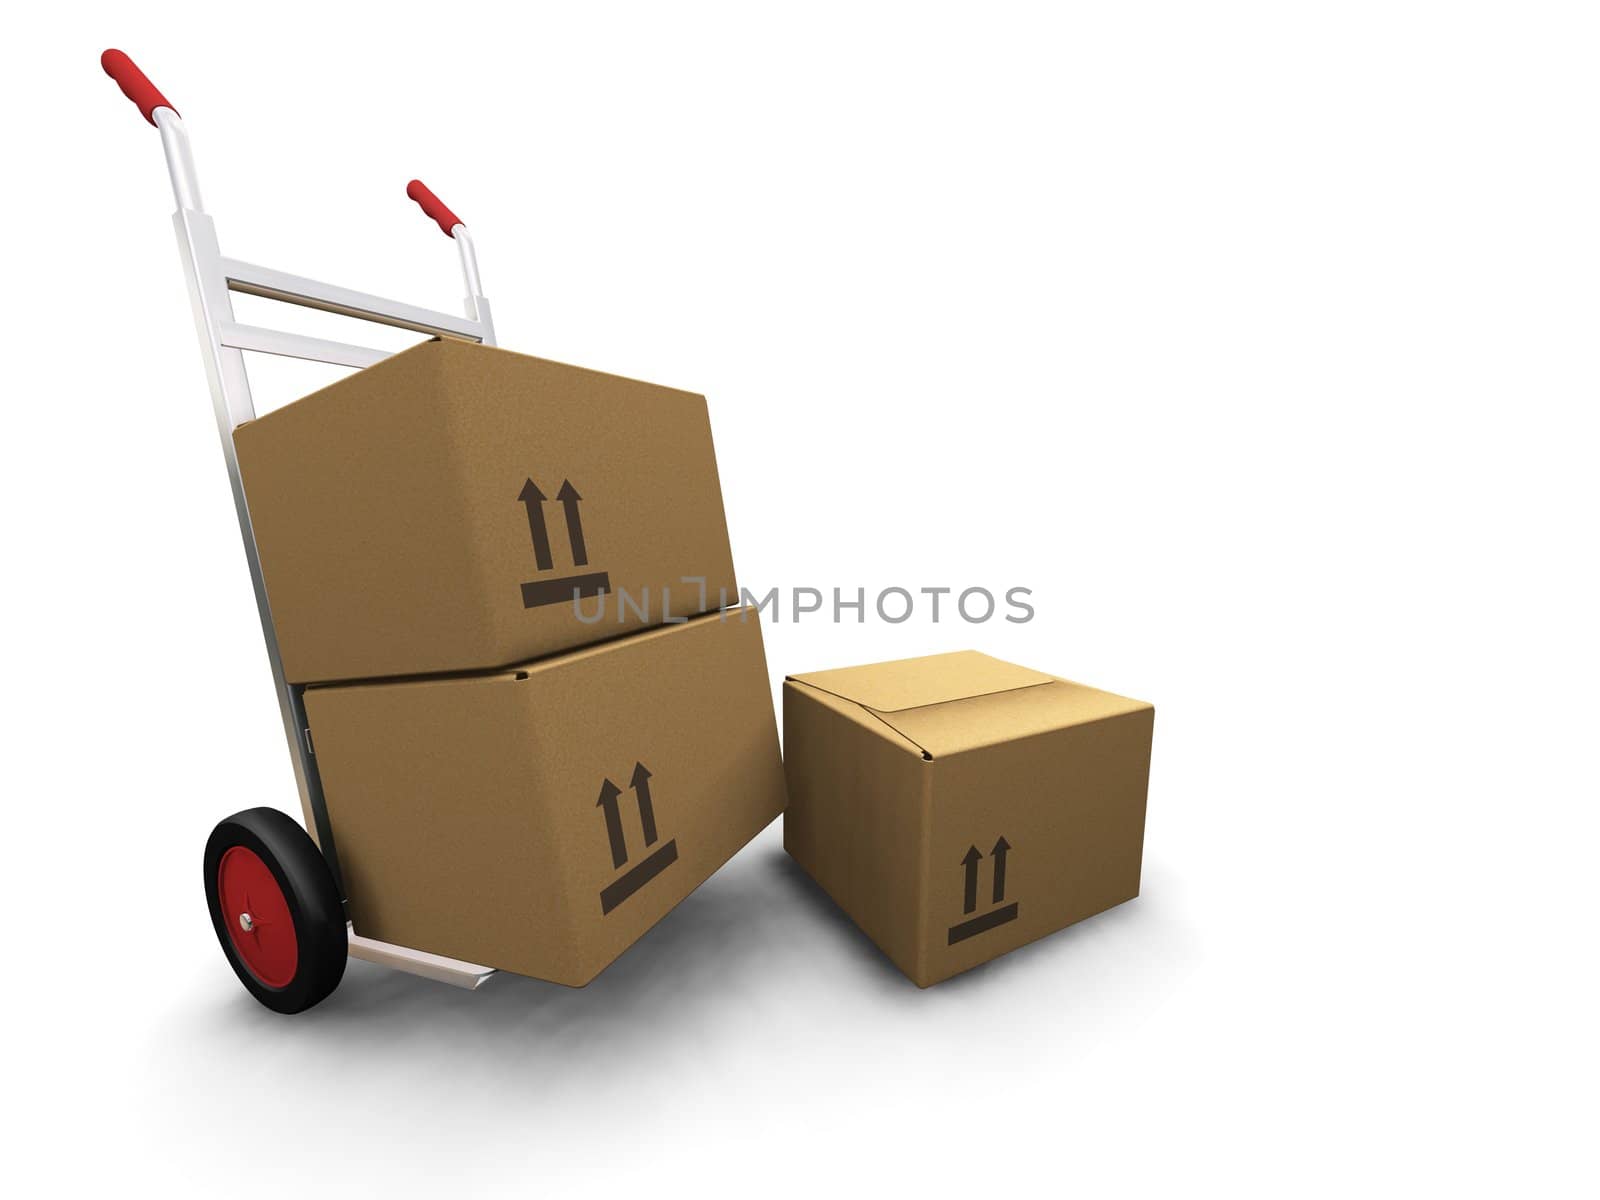 3D render of a hand truck with boxes